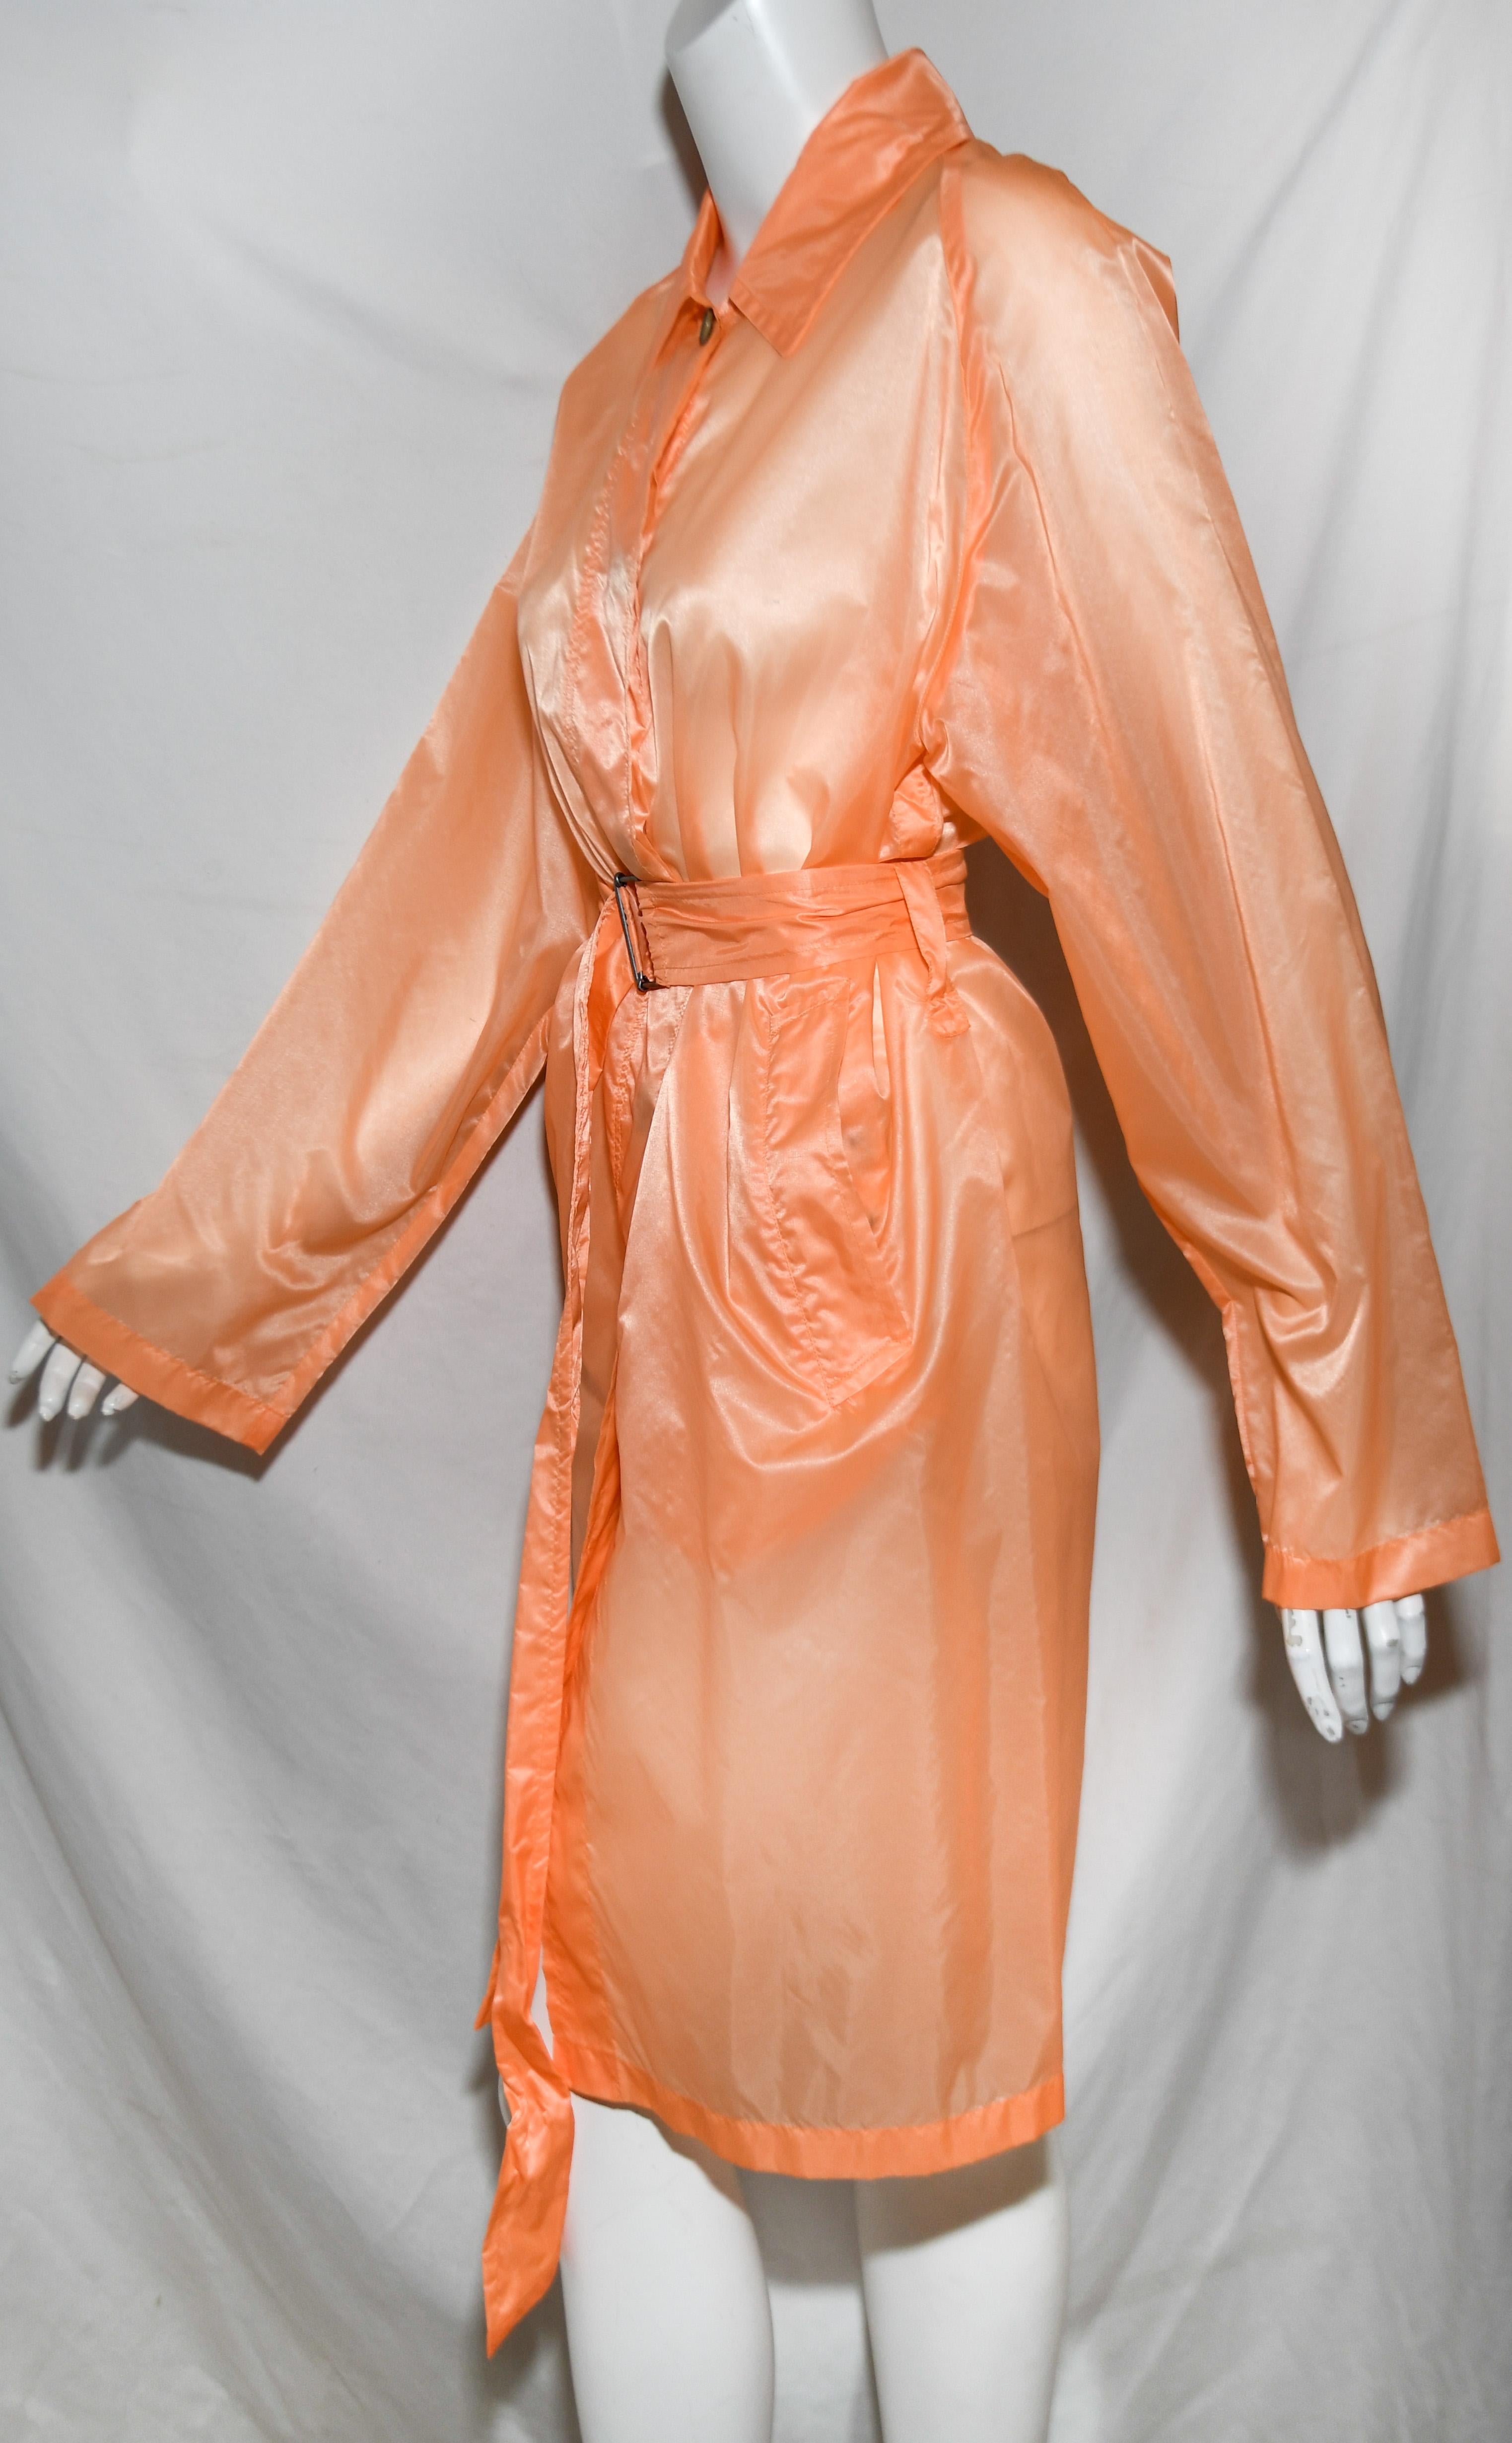 Dries van Noten orange light weight semi sheer raincoat includes a belt like sash.   This raincoat contains 2 front patch pockets and 5 buttons at front for closure.  This coat is in excellent condition.  Made in Romania